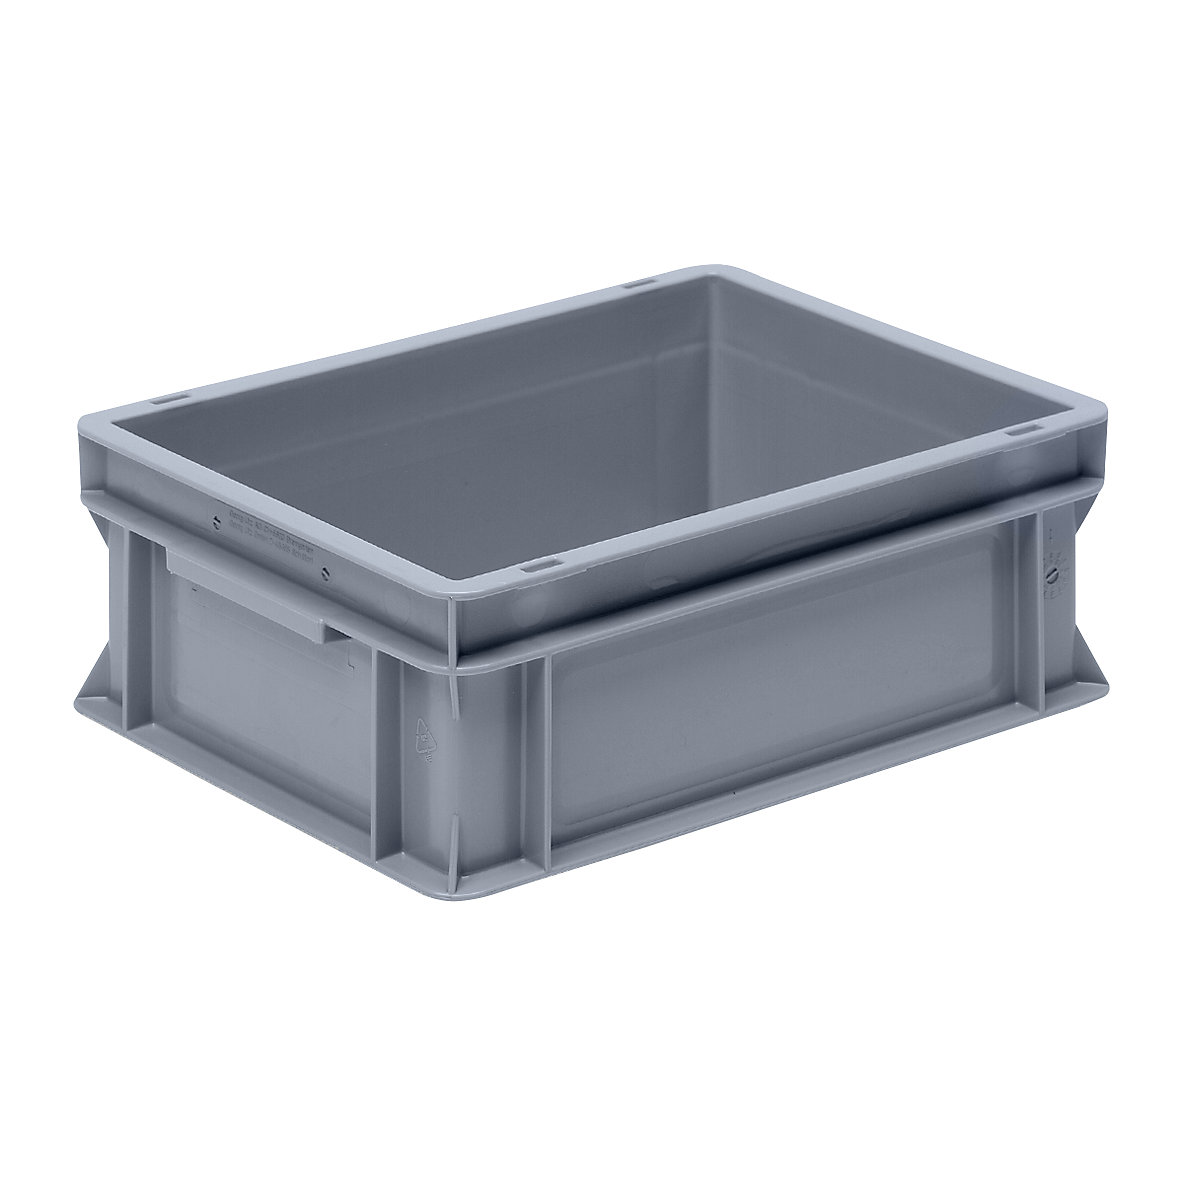 Euro stacking container made of polypropylene (PP), max. load 20 kg, silver grey, capacity 12 l, external height 145 mm, pack of 6